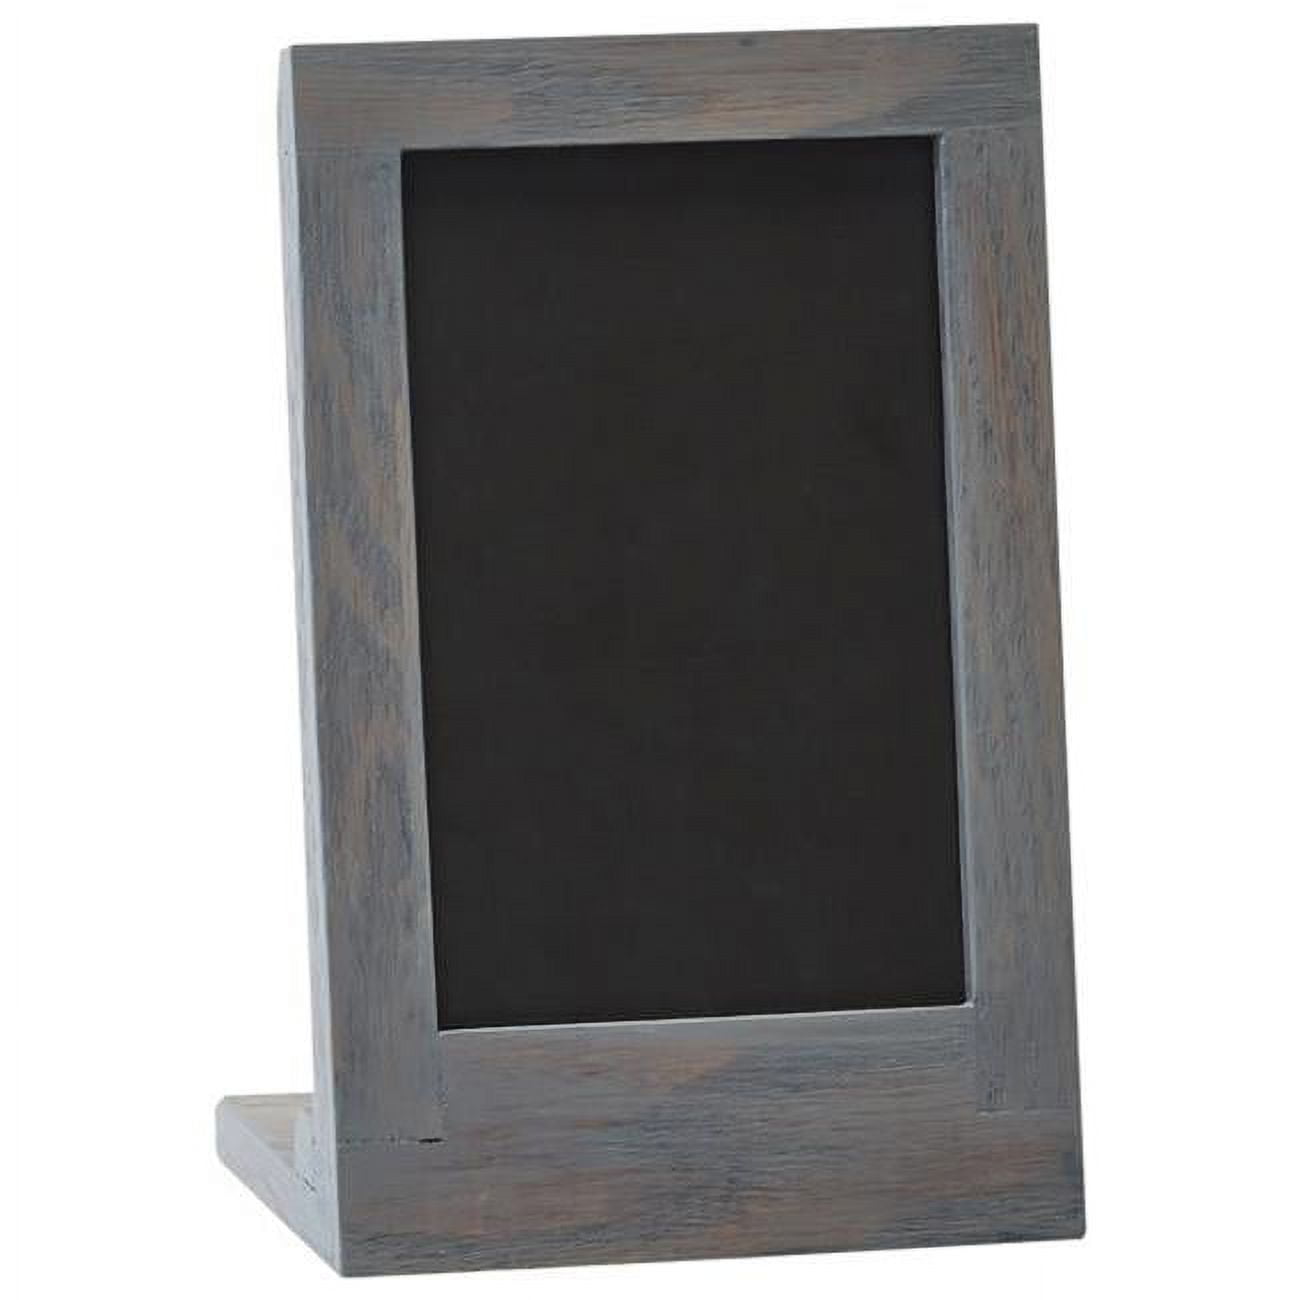 Picture of Cal Mil 3818-46-83 Ashwood Chalkboard Stand - 4 x 3.5 x 6.5 in.